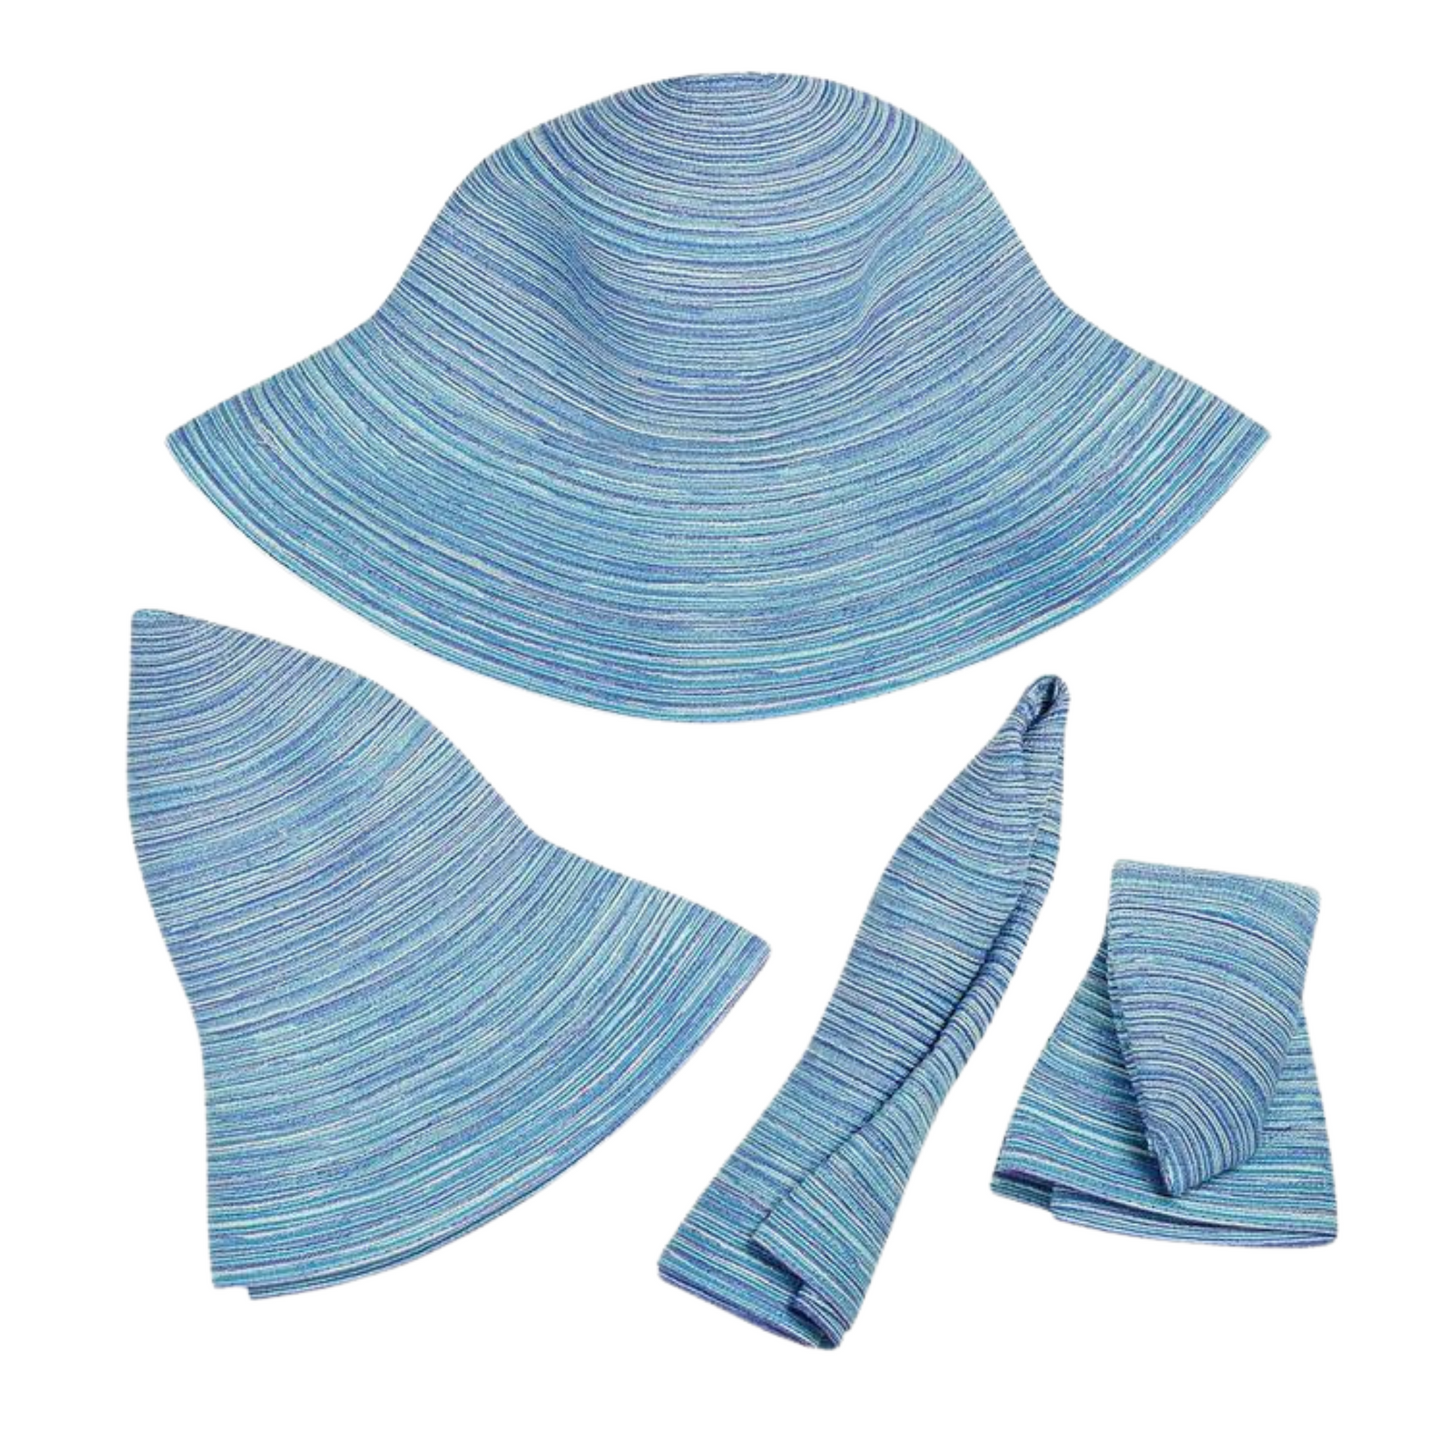 A series of 4 hats in light blue streaked colouring show the iterations of the Sydney being folded into a small rectangle. It is first folded in half, then rolled into a long cylinder, then folded in half.